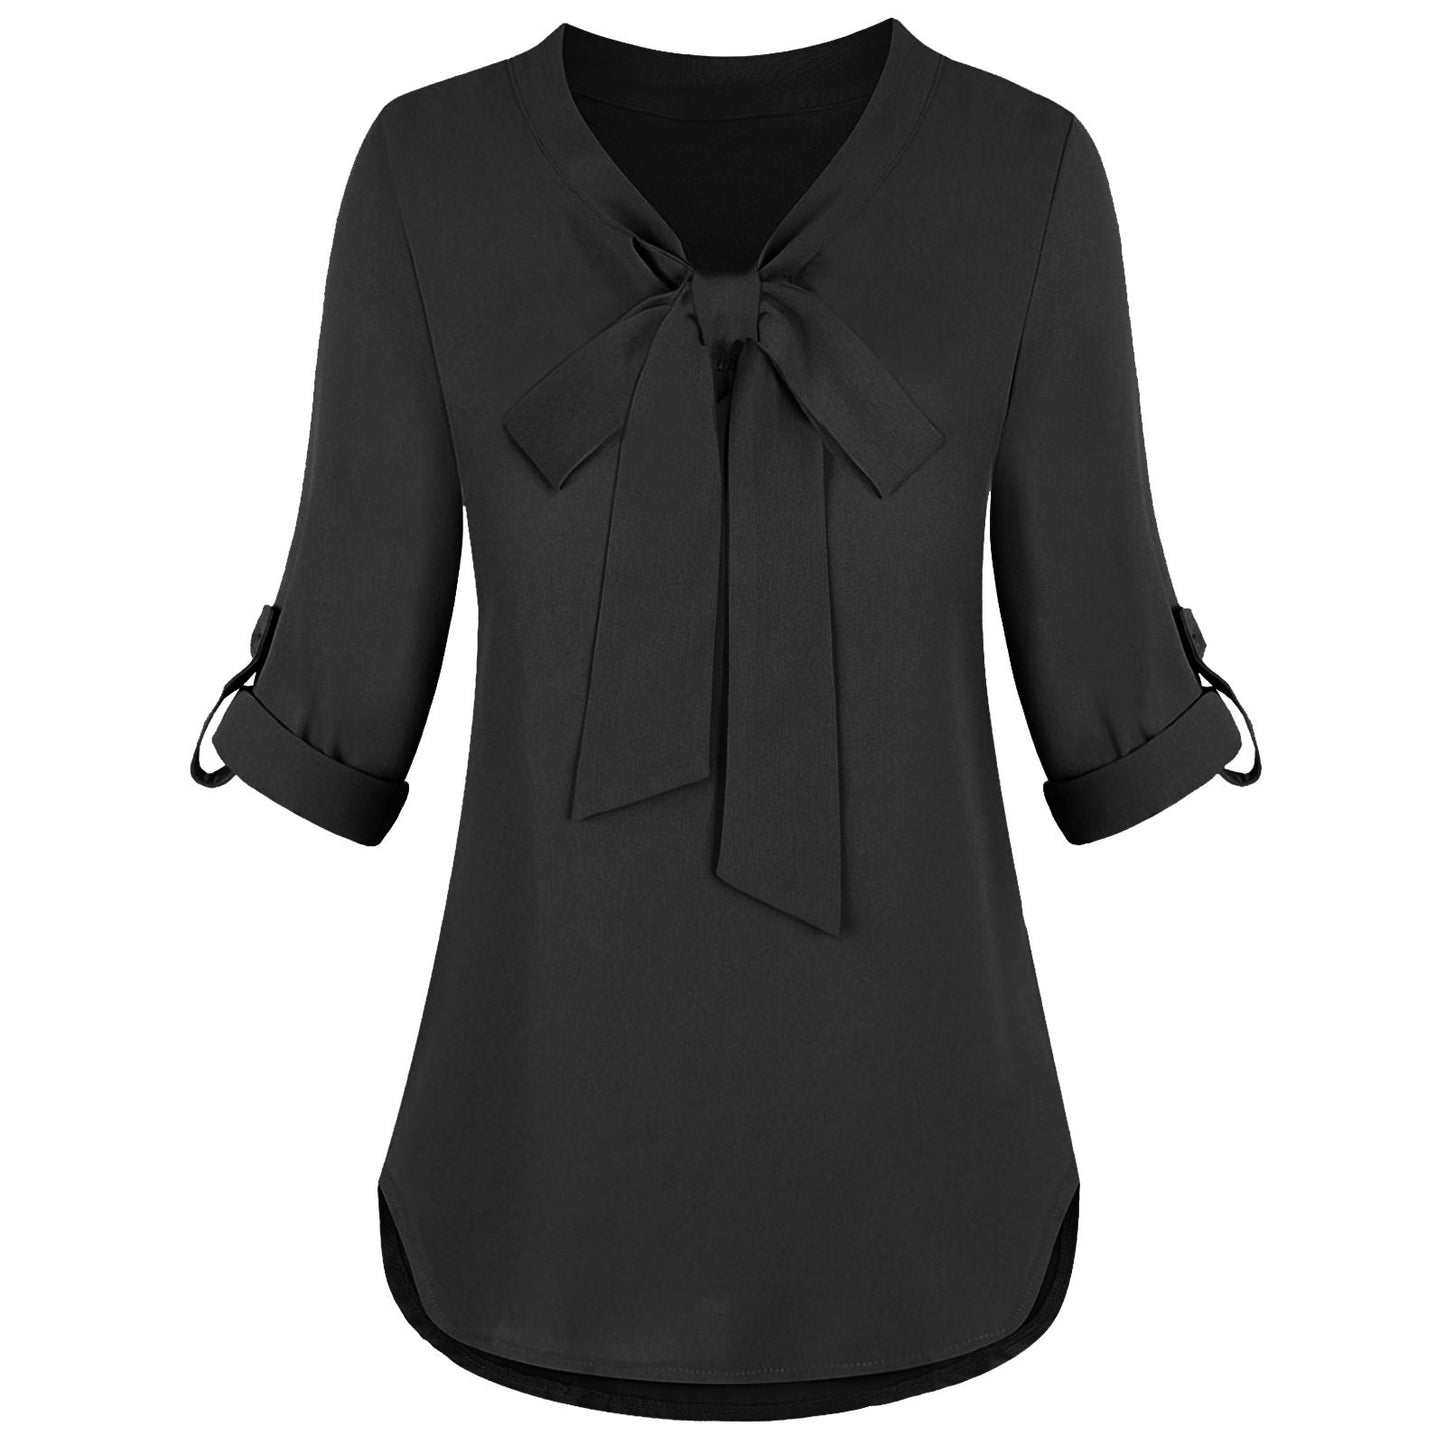 Plus Size Shirt for Women with Rolled Sleeves